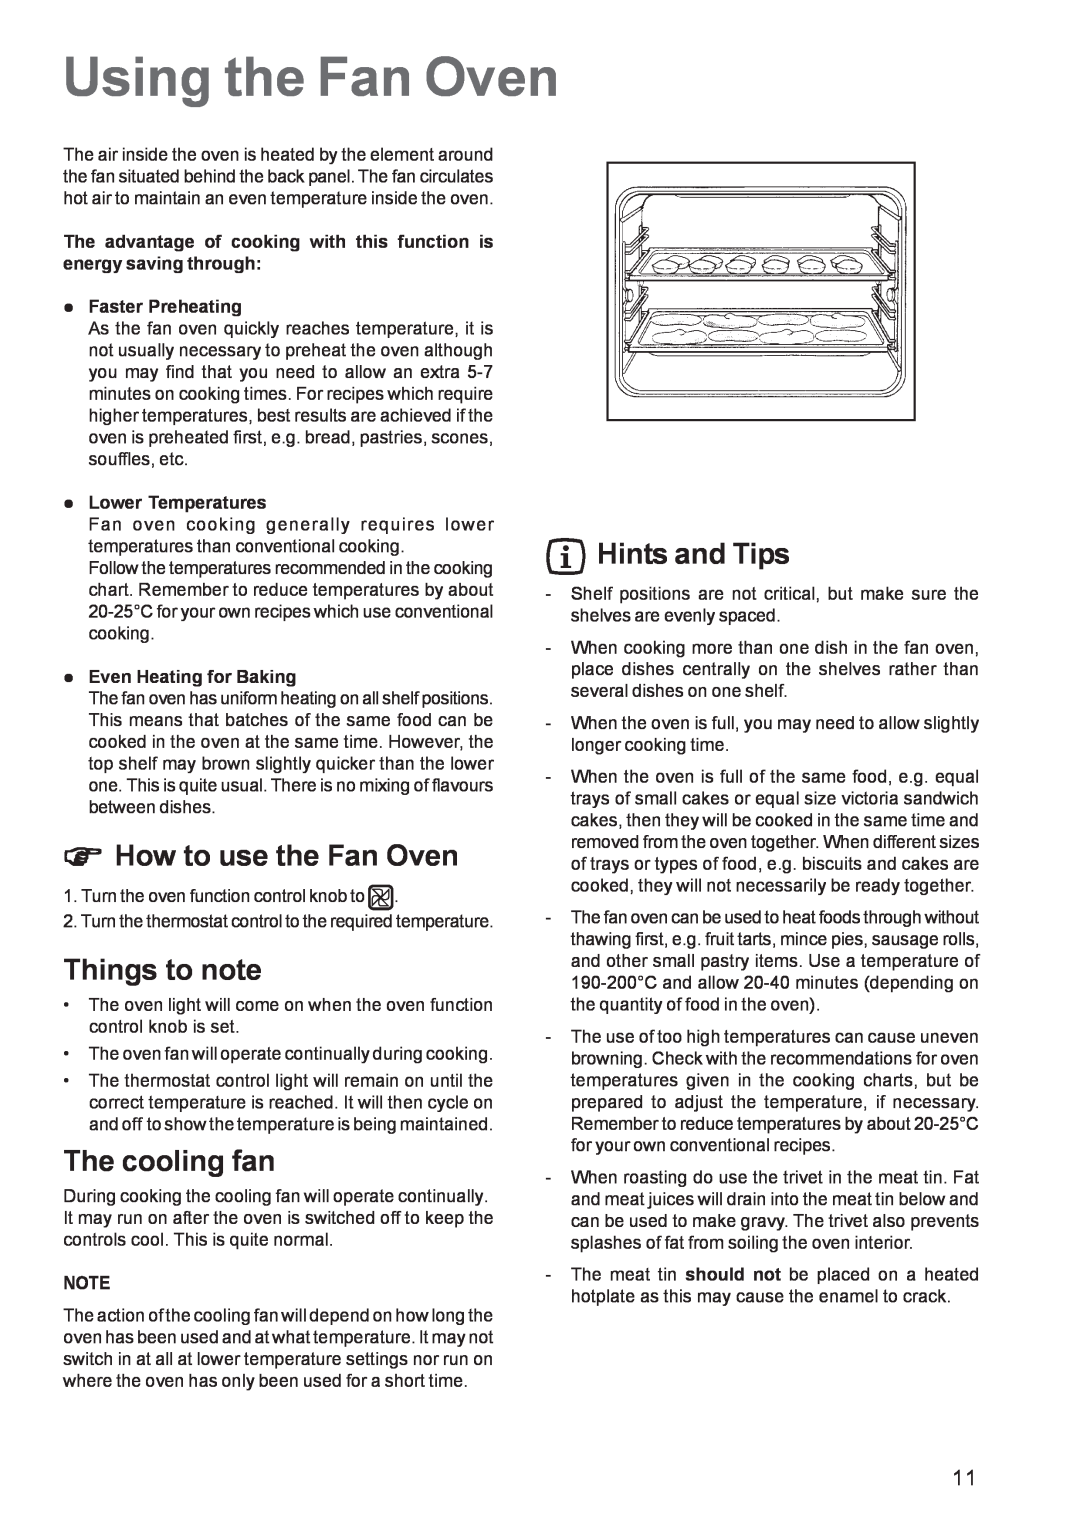 Zanussi ZBS863 manual Using the Fan Oven, How to use the Fan Oven, Things to note, The cooling fan, Hints and Tips 